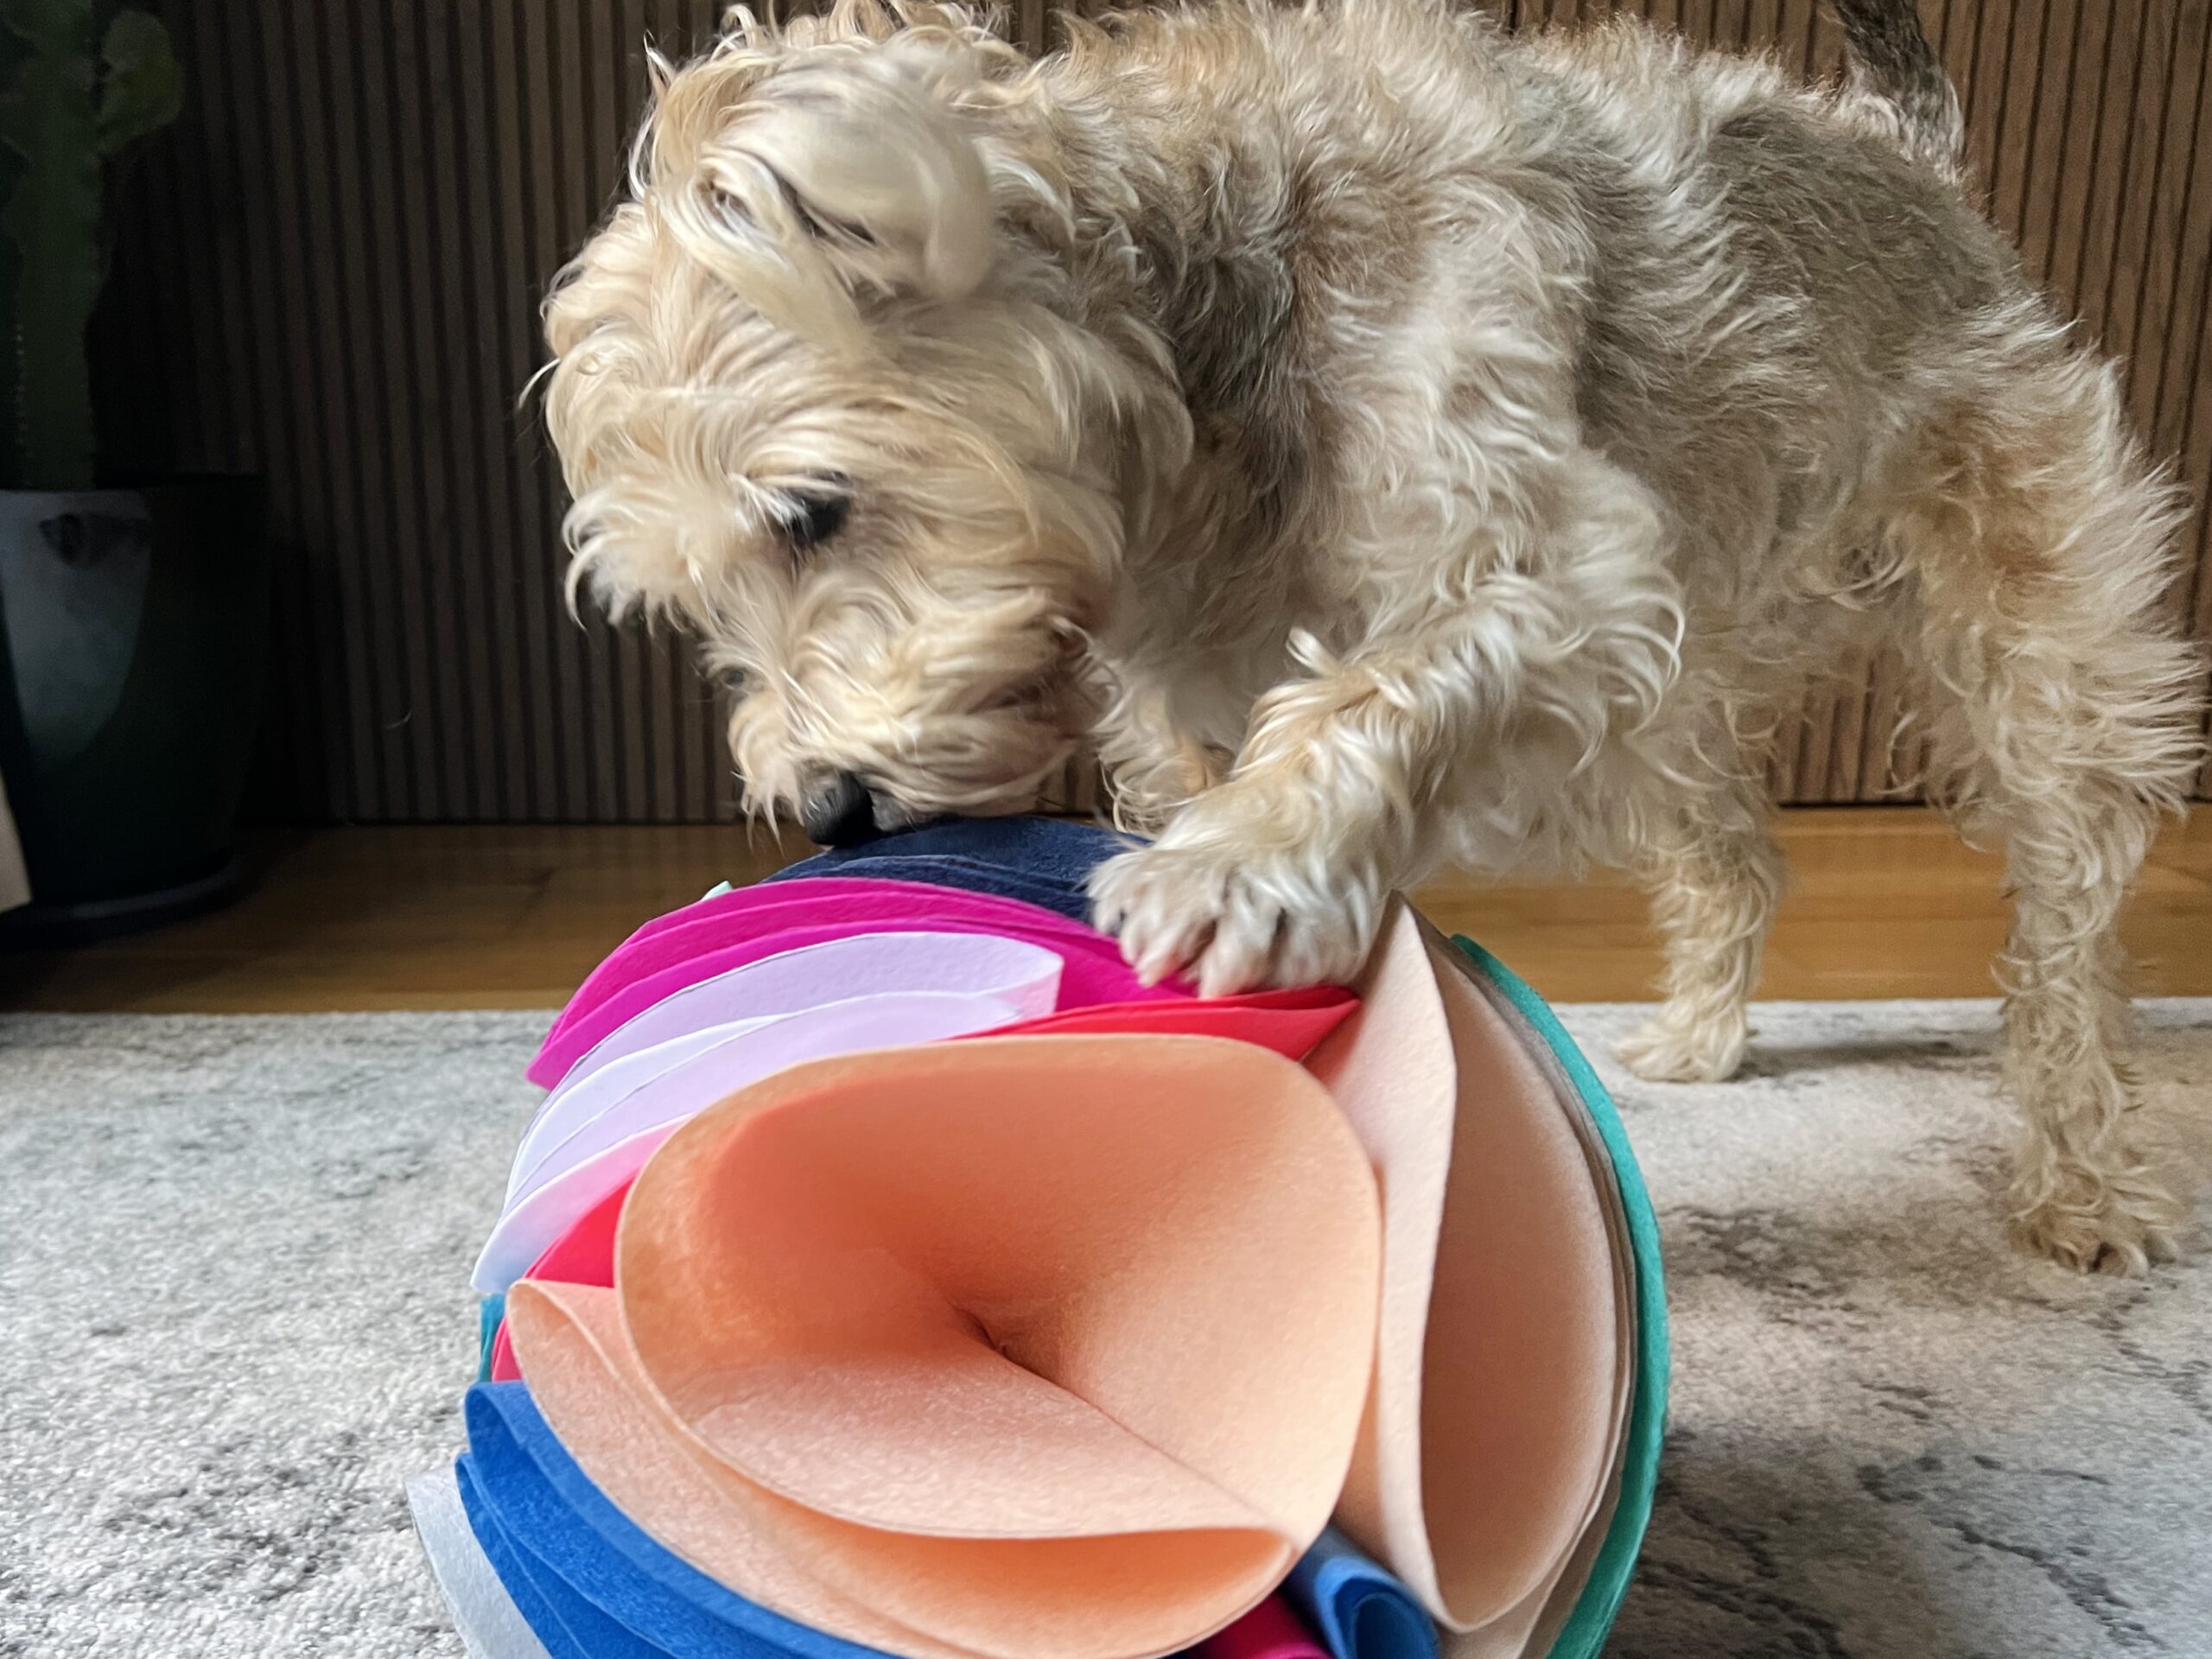 4 creative DIY brain games for dogs - 5 minutes to make